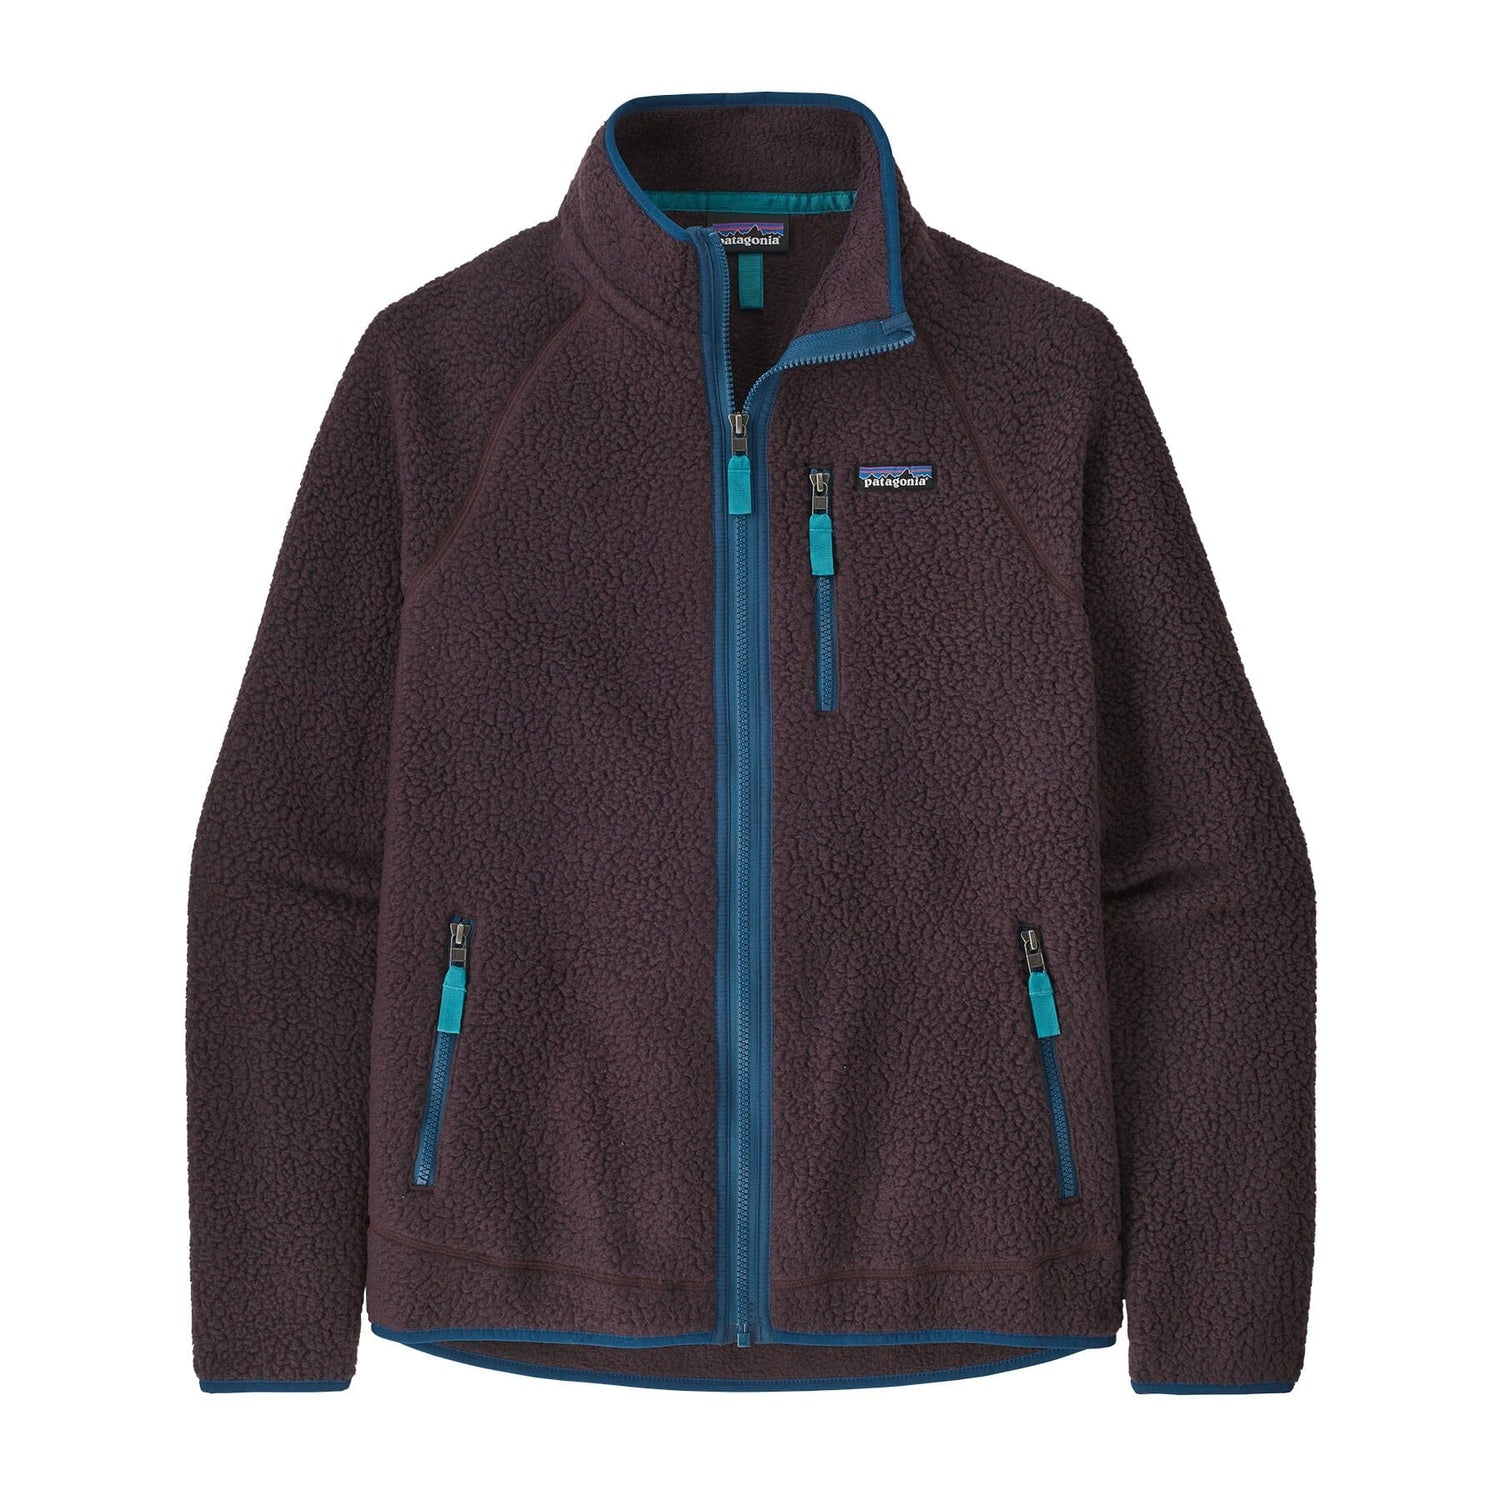 Patagonia M's Retro Pile Jacket - 100 % Recycled Polyester Obsidian Plum Jacket